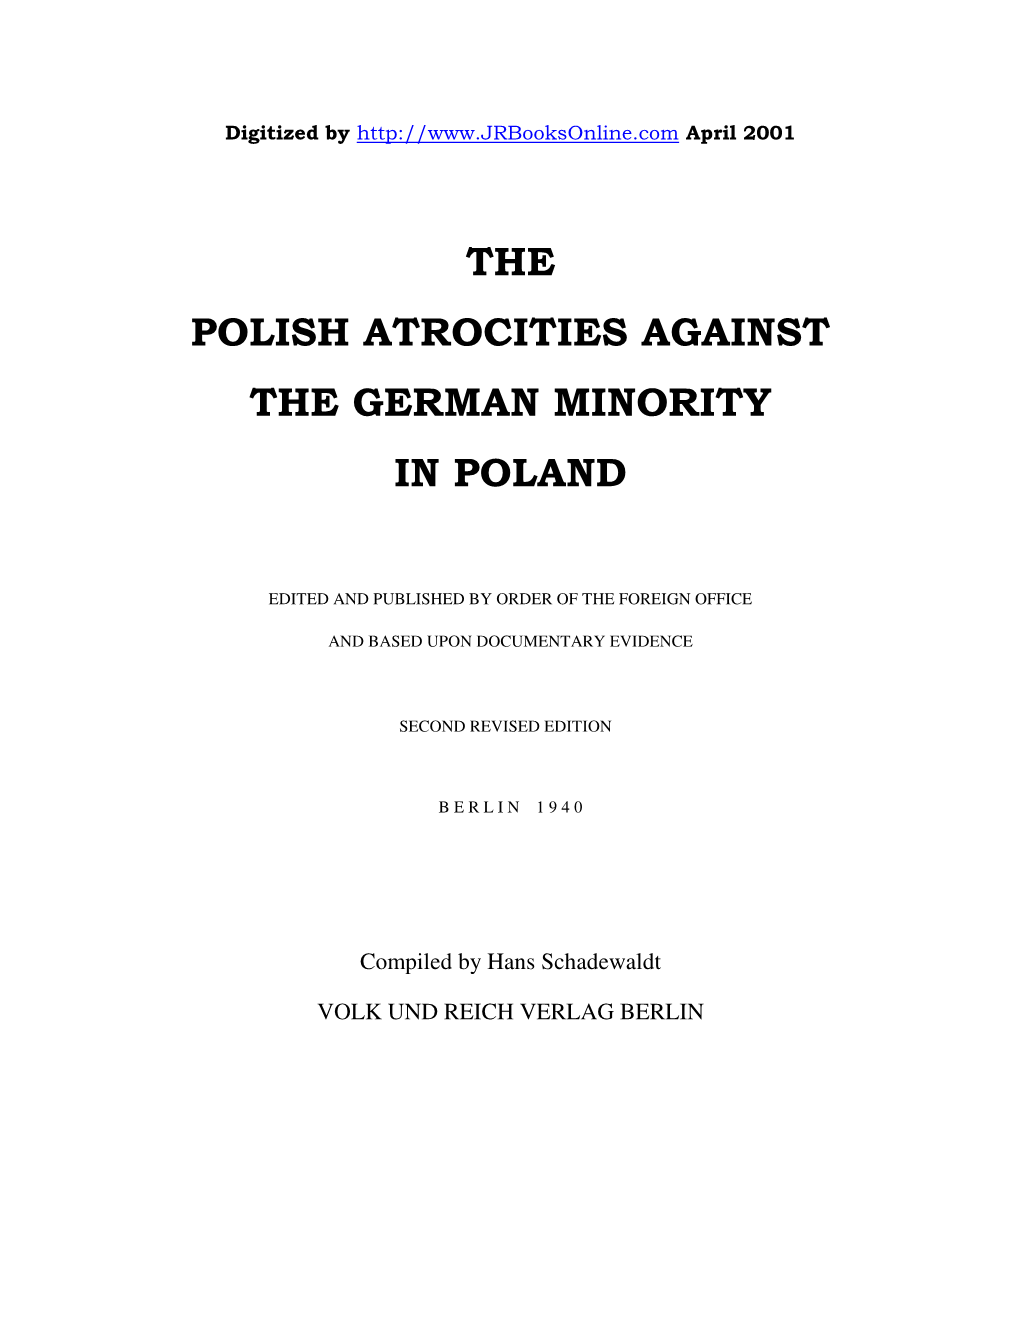 The Polish Atrocities Against the German Minority in Poland